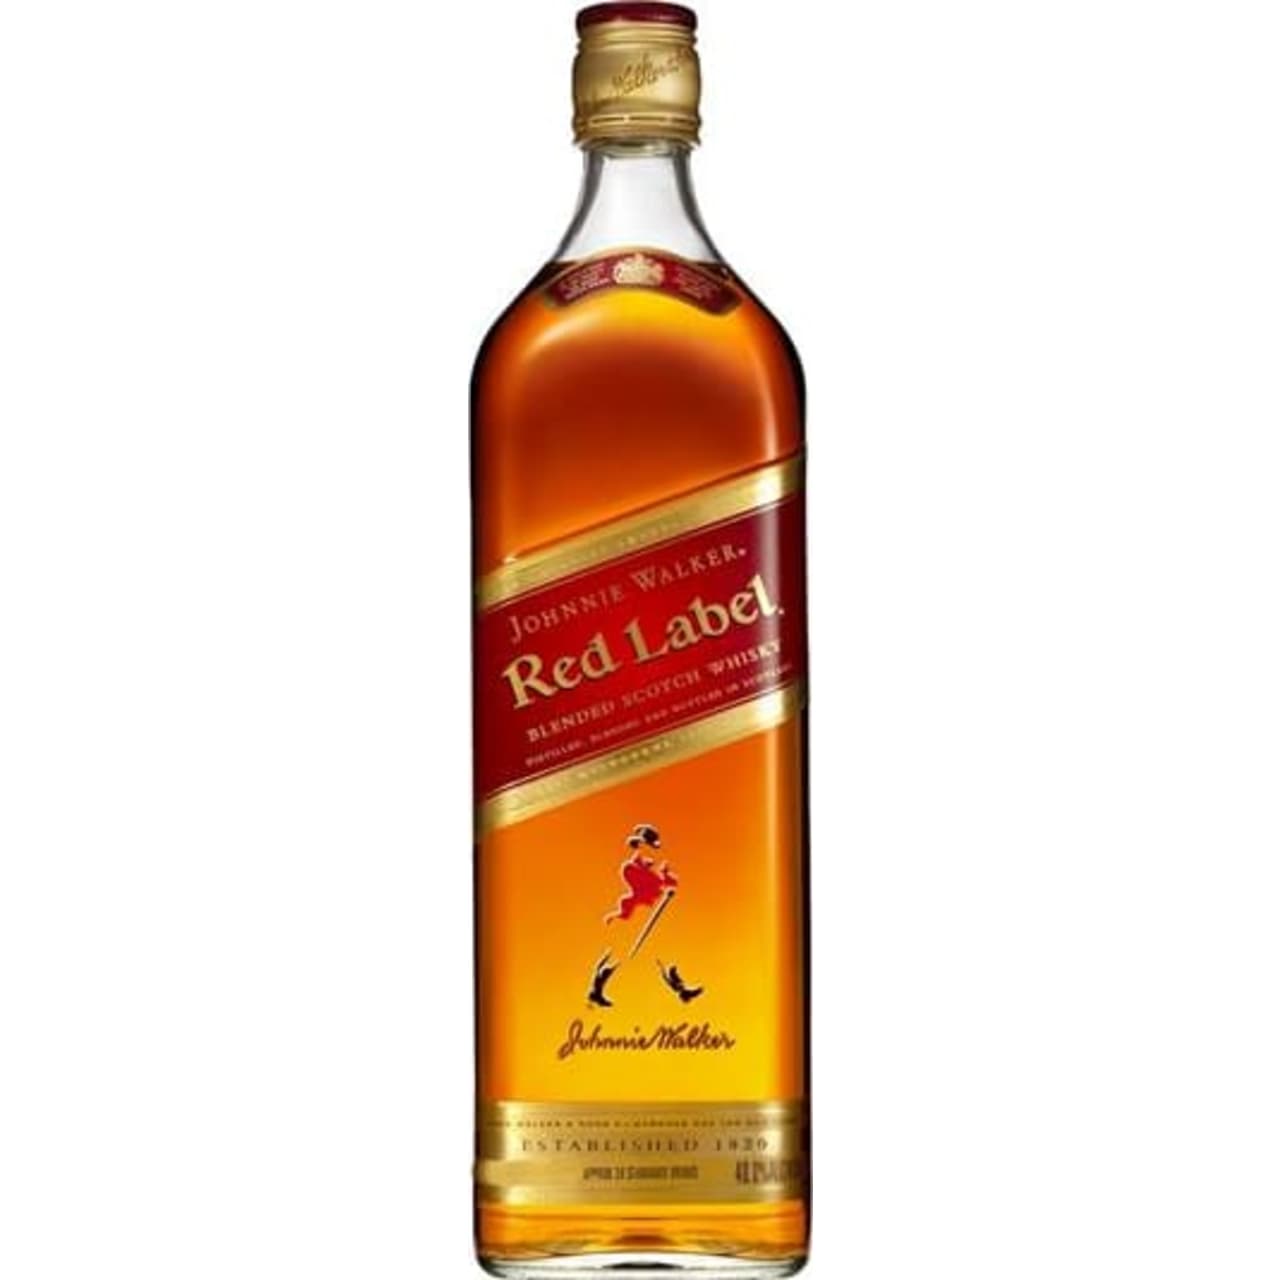 Johnnie Walker Red Label is crackling with spice and bursting with vibrant, smoky flavours. It excites the palate with the unmistakable zing of aromatic spices, cinnamon and pepper, fizzing over the center of your tongue. There's a suggestion of fruity sweetness, like fresh apple, before the Johnnie Walker signature of a long, lingering, smoky finish.